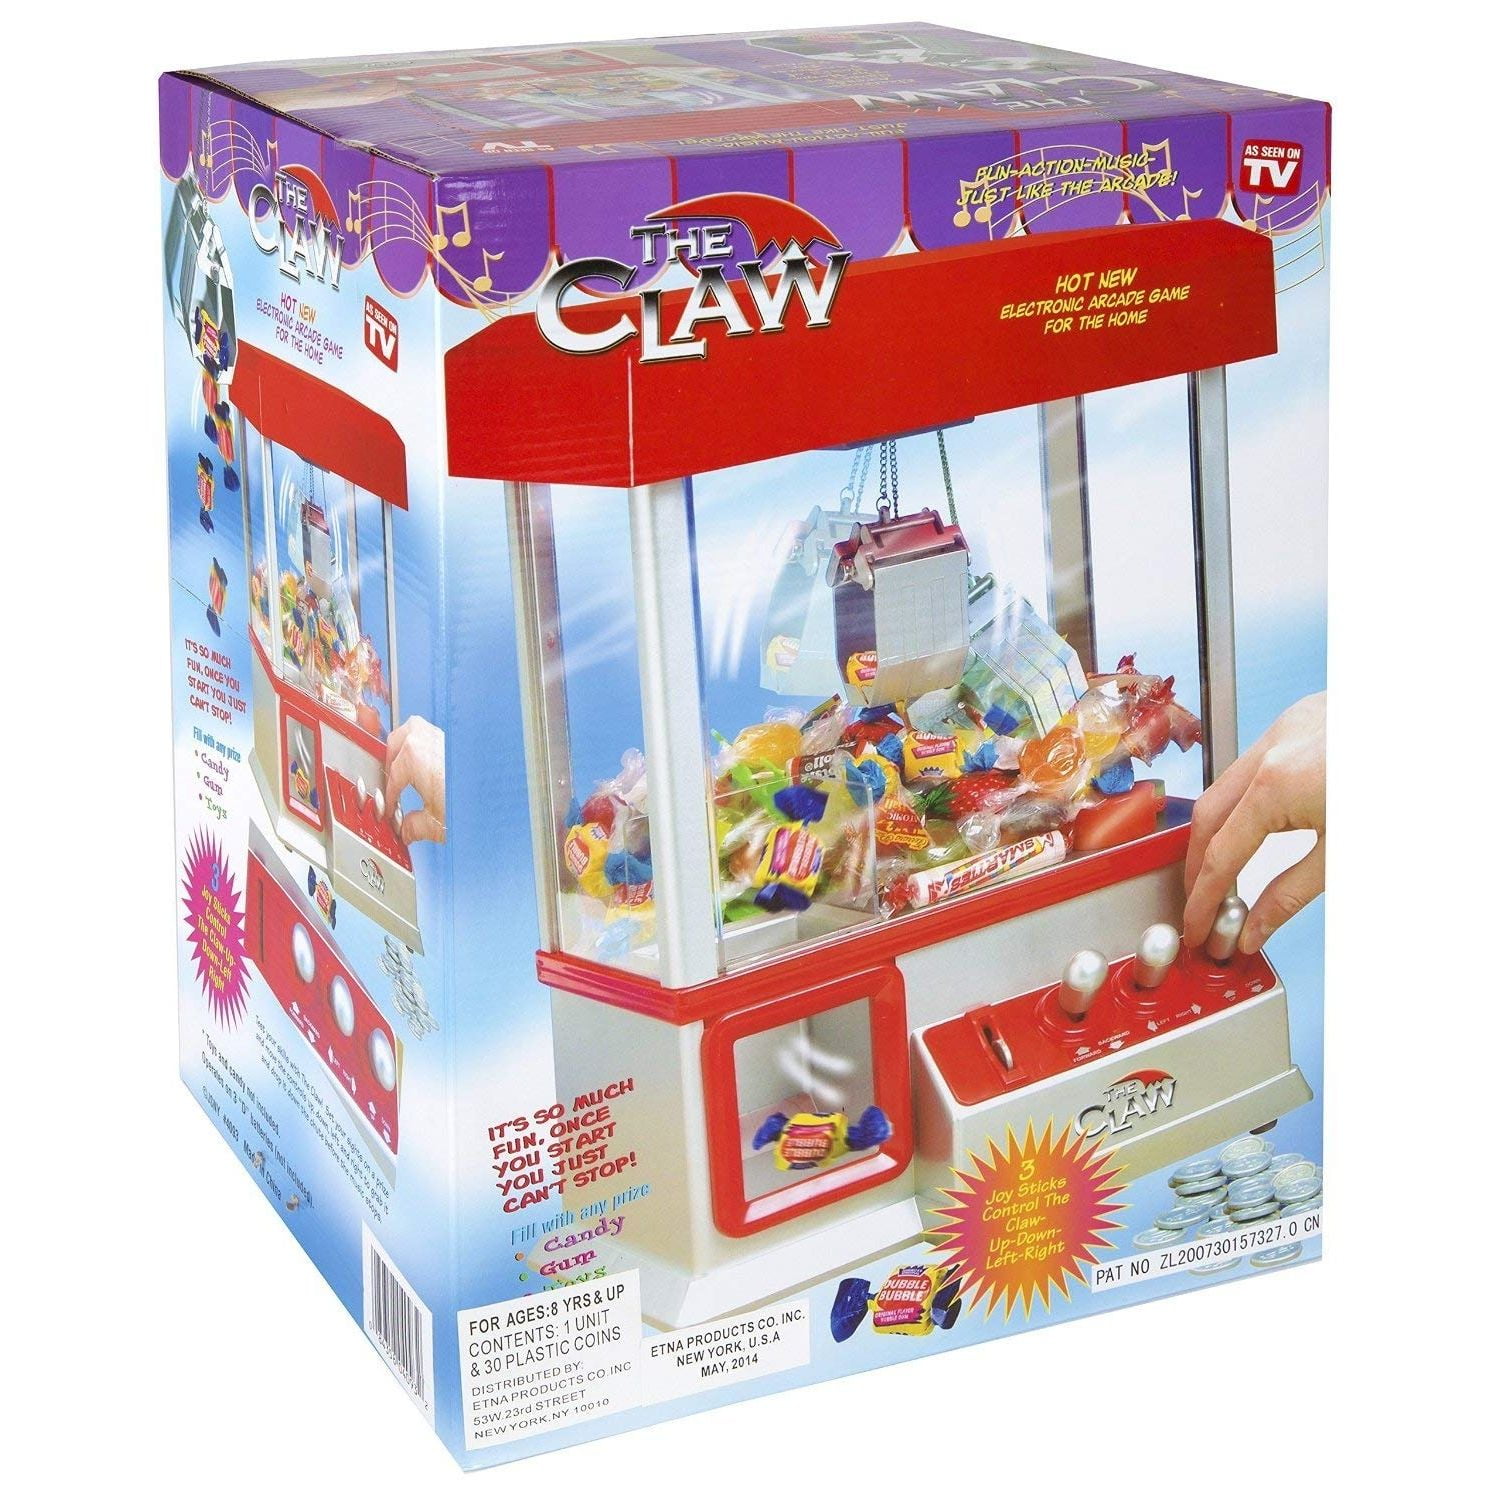 Home Arcade Carnival Crane Claw Game Electronic Grabber Candy Gum Toys included 